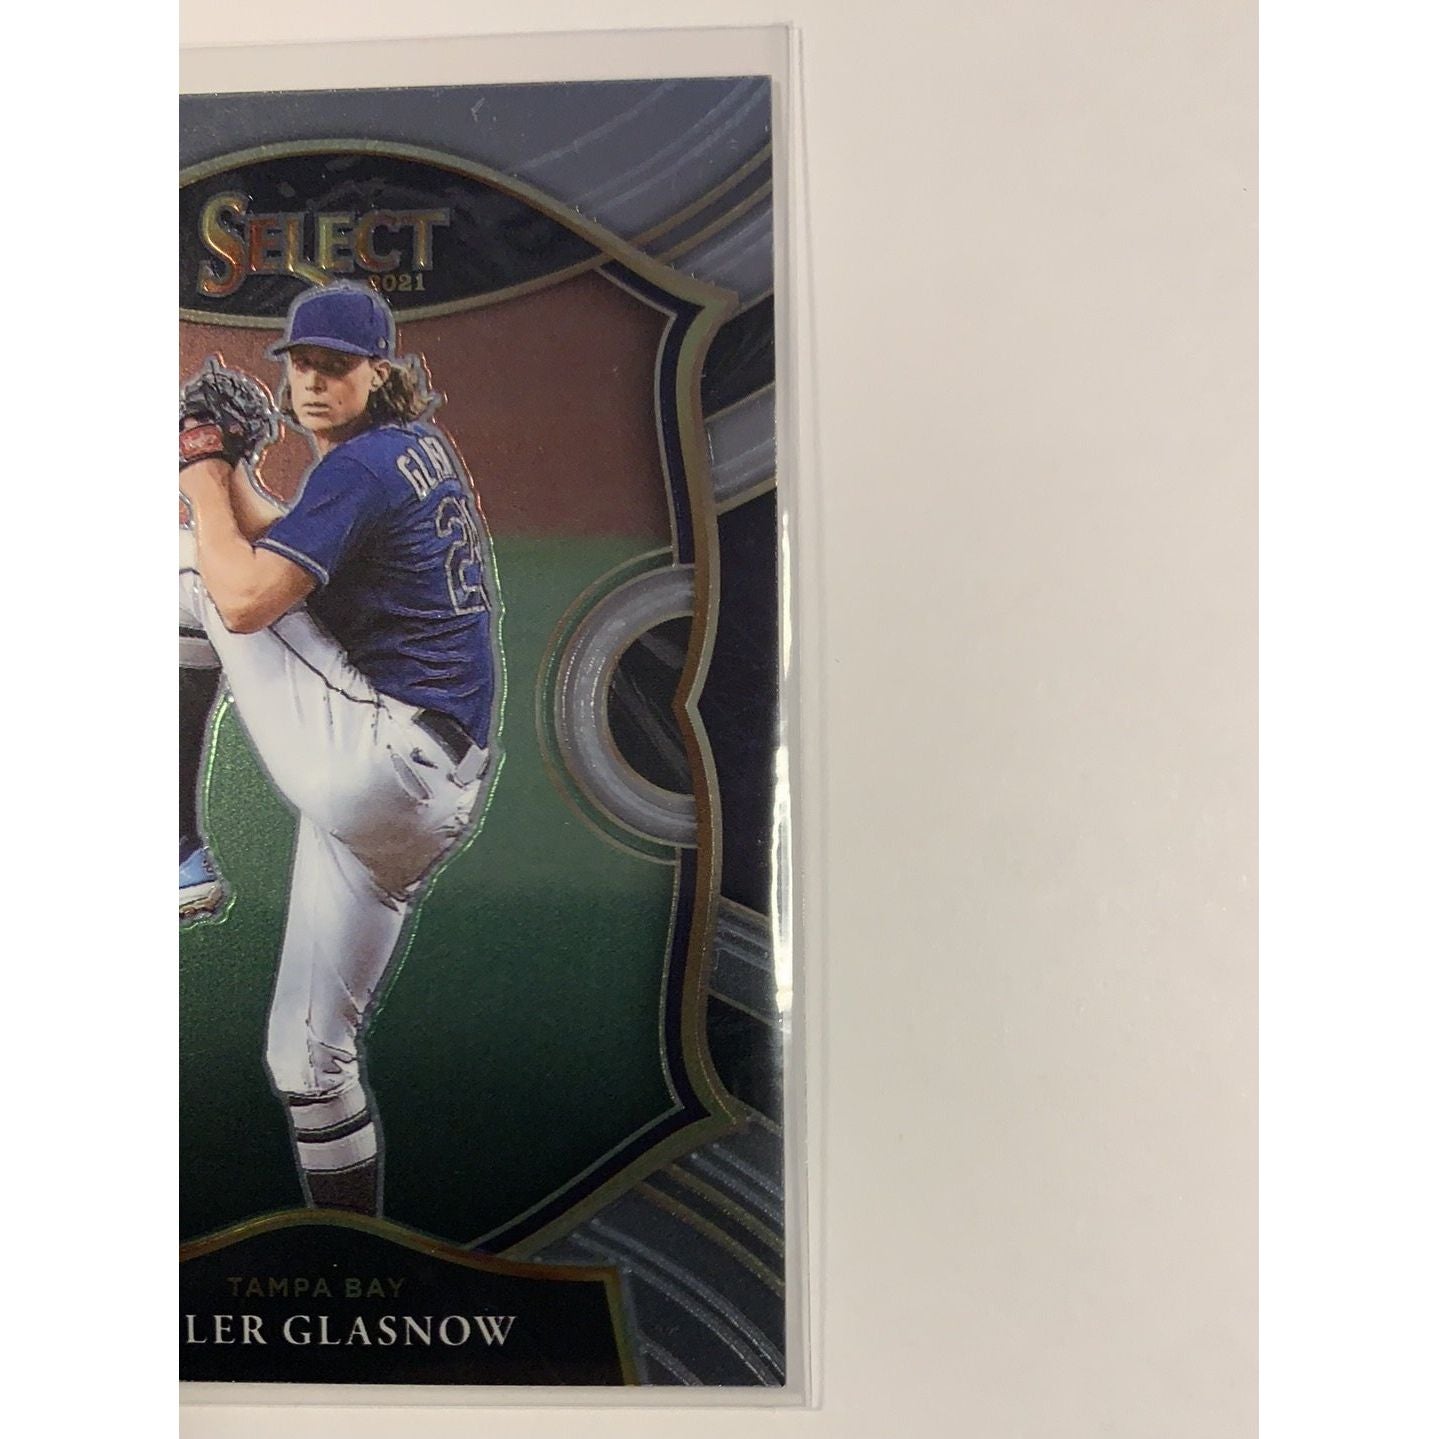  2021 Panini Select Tyler Glasnow Concourse Base #37  Local Legends Cards & Collectibles